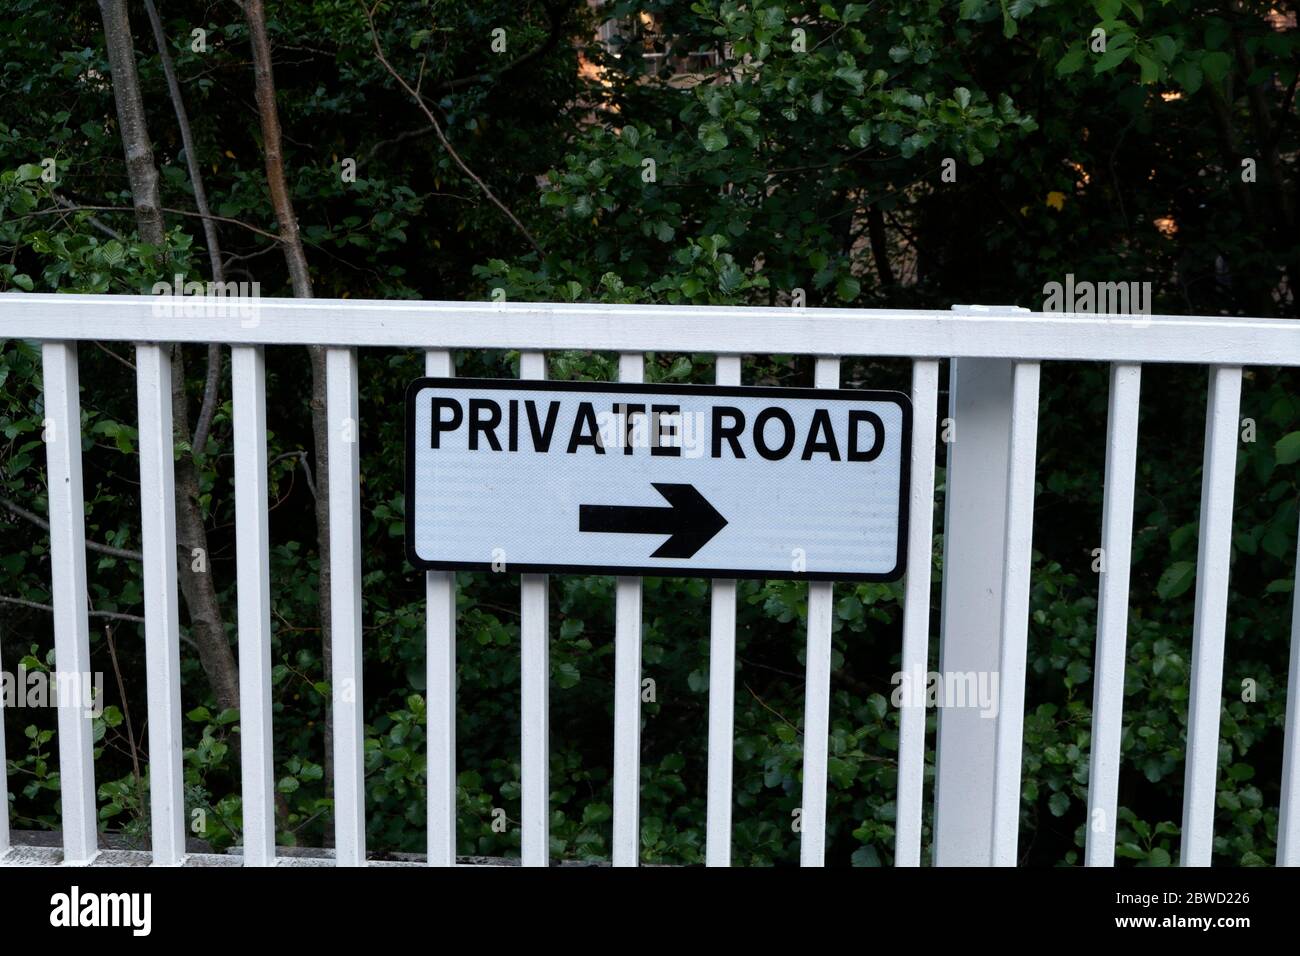 Roadside sign indicating a private road Stock Photo